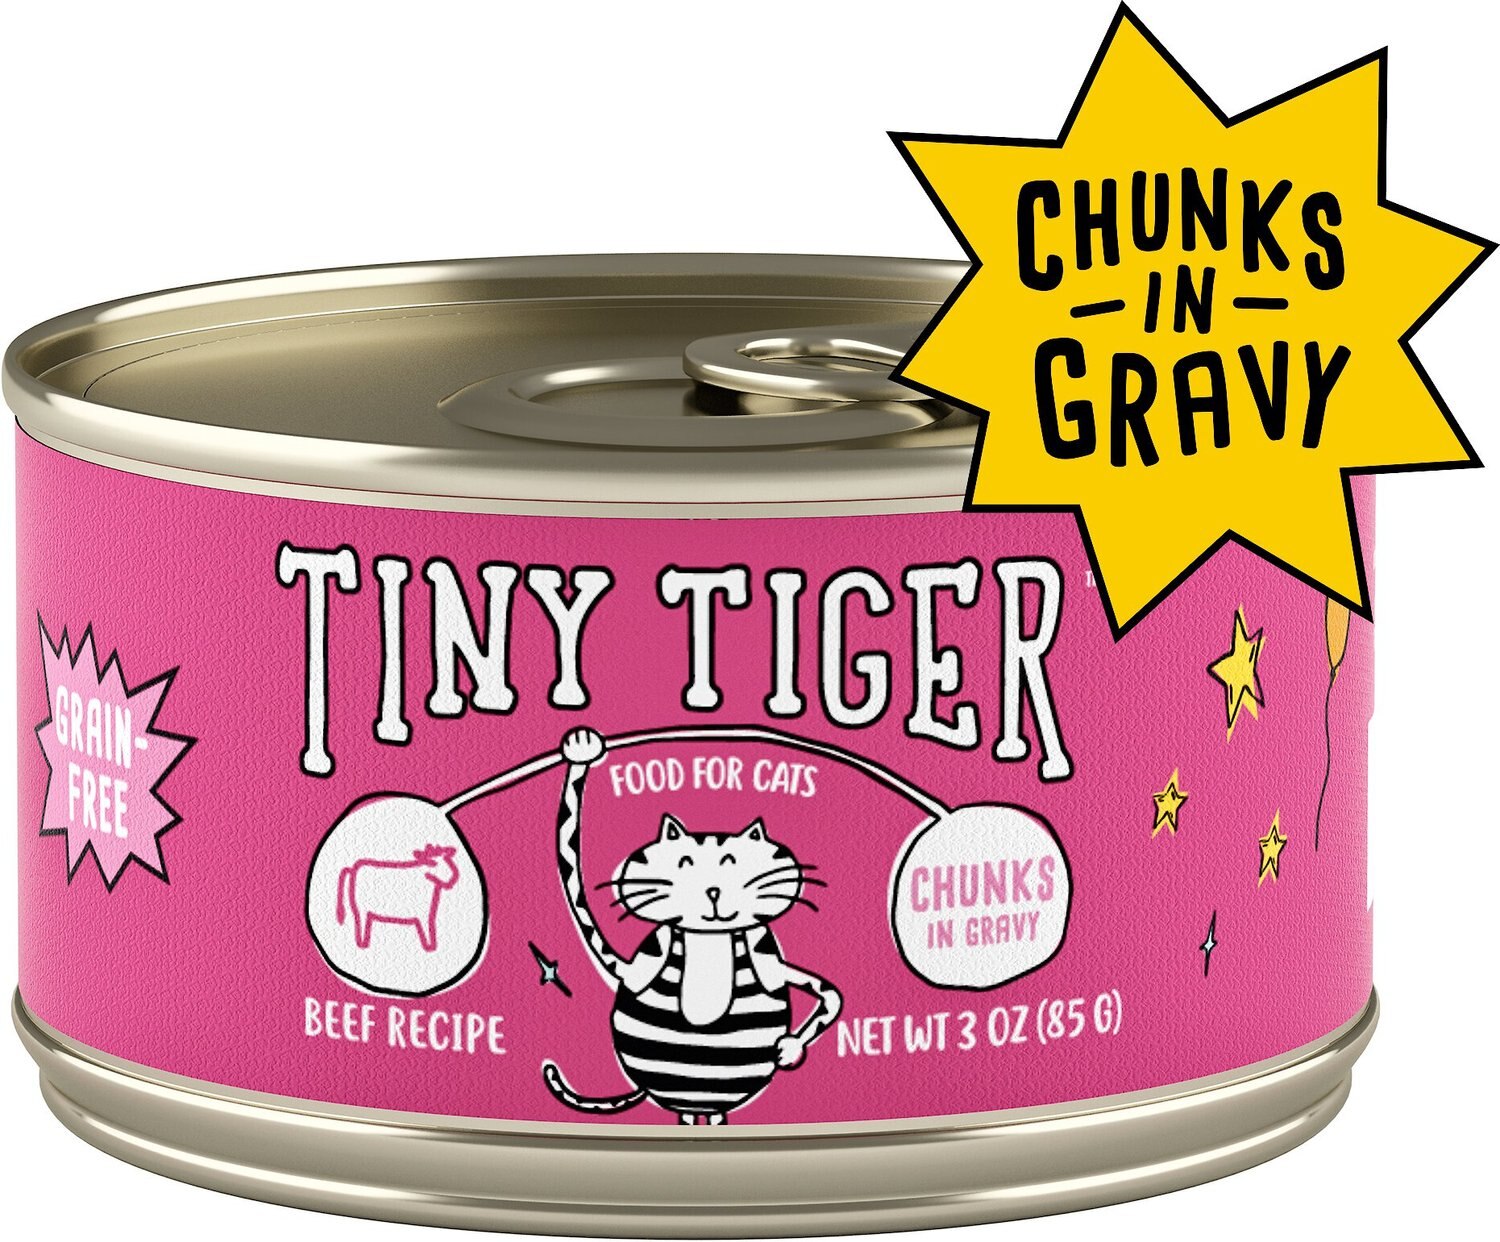 TINY TIGER Chunks in Gravy Beef Recipe Grain-Free Canned ...